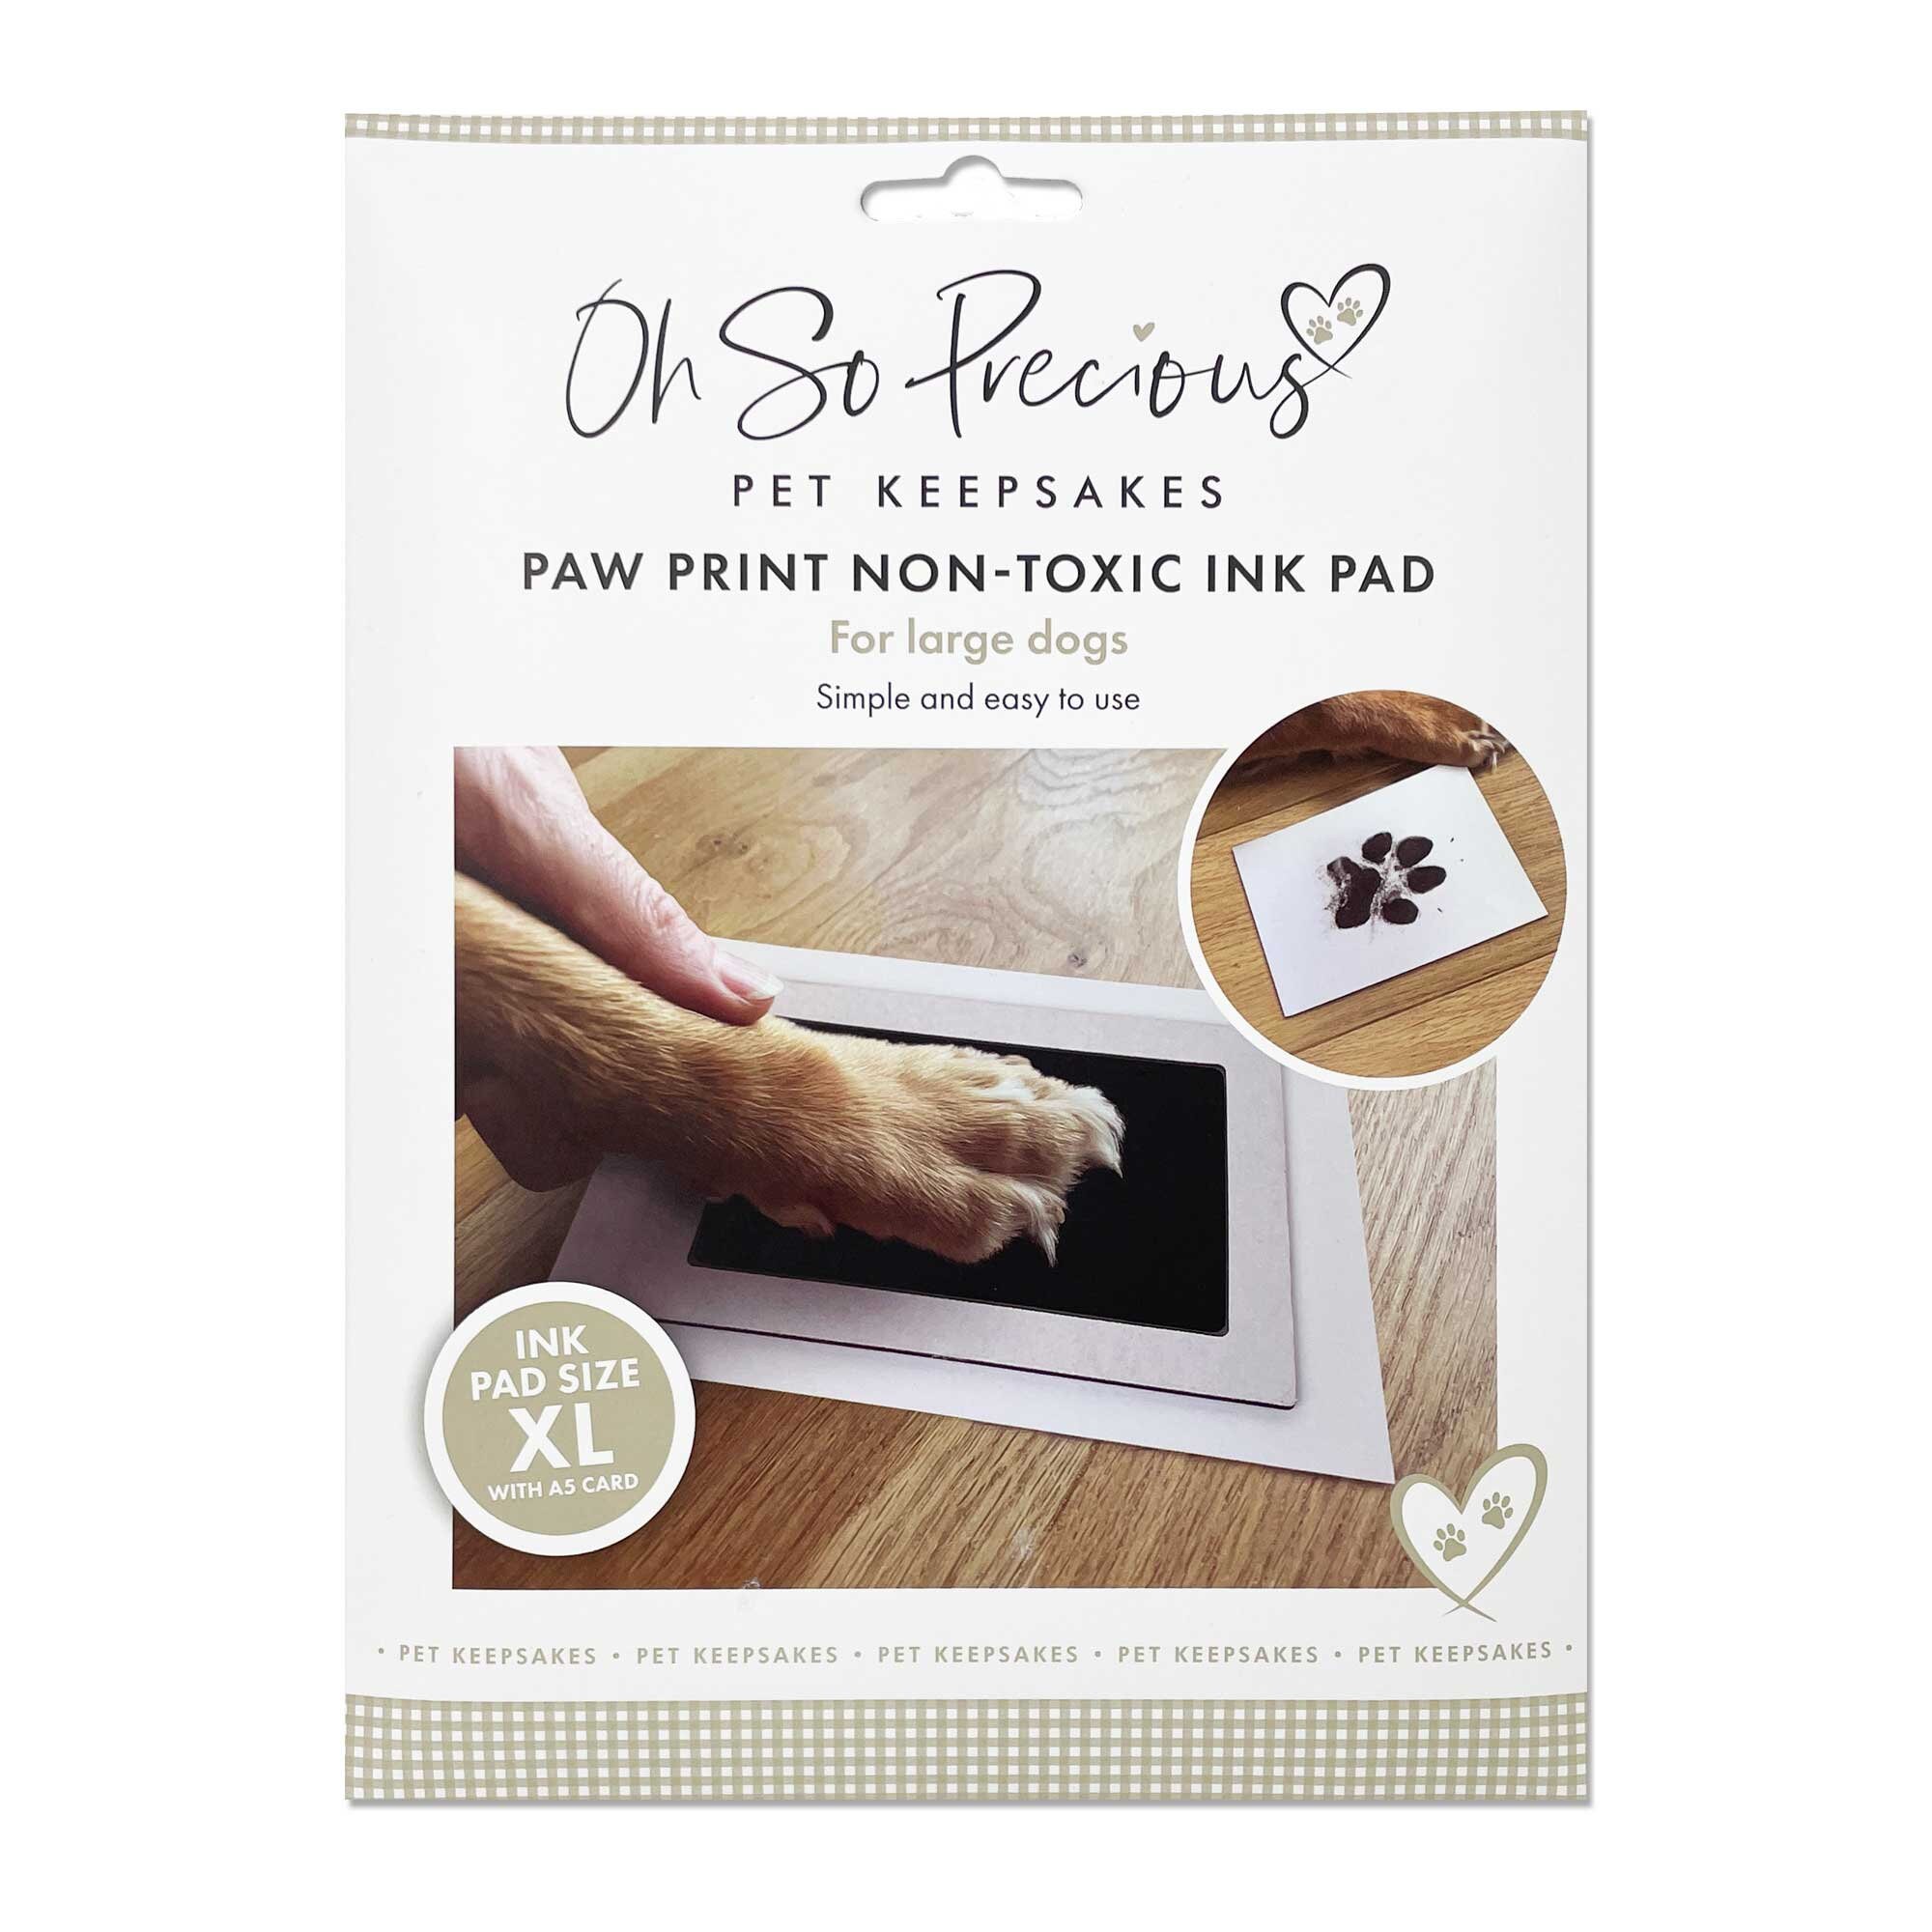 How To Make A Paw Print Stamp Pad 